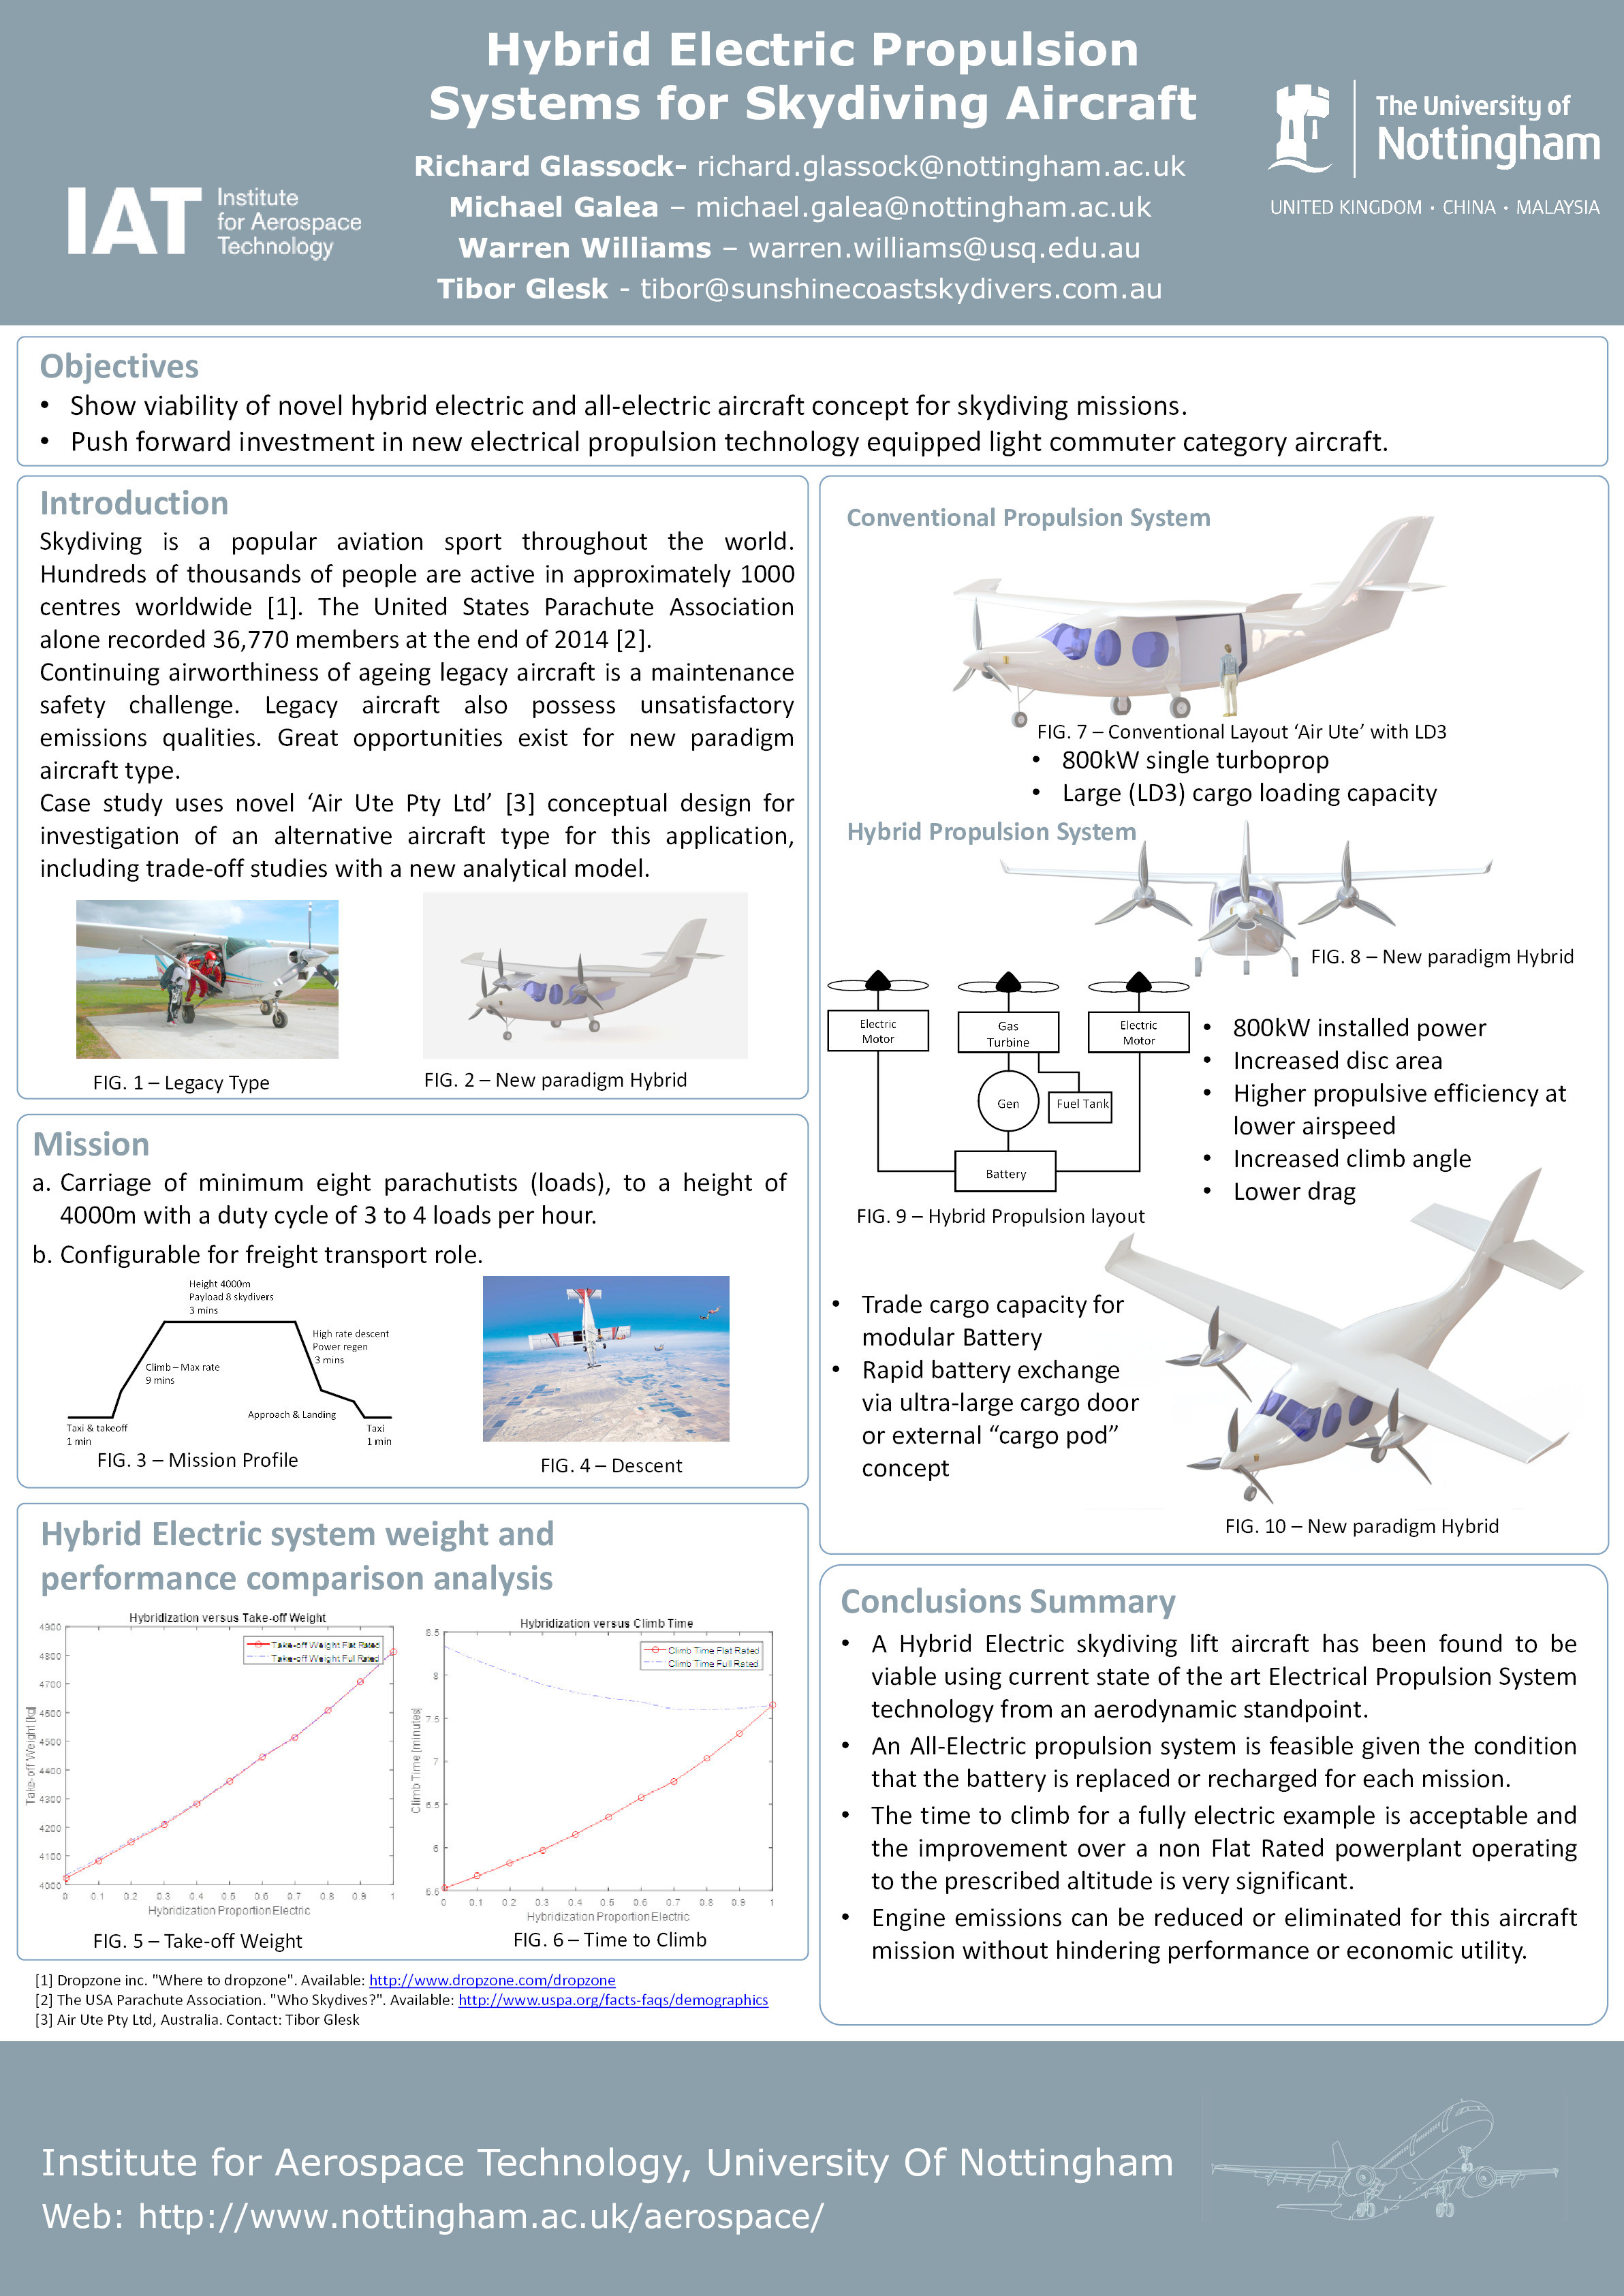 Hybrid electric propulsion systems for skydiving aircraft Thumbnail